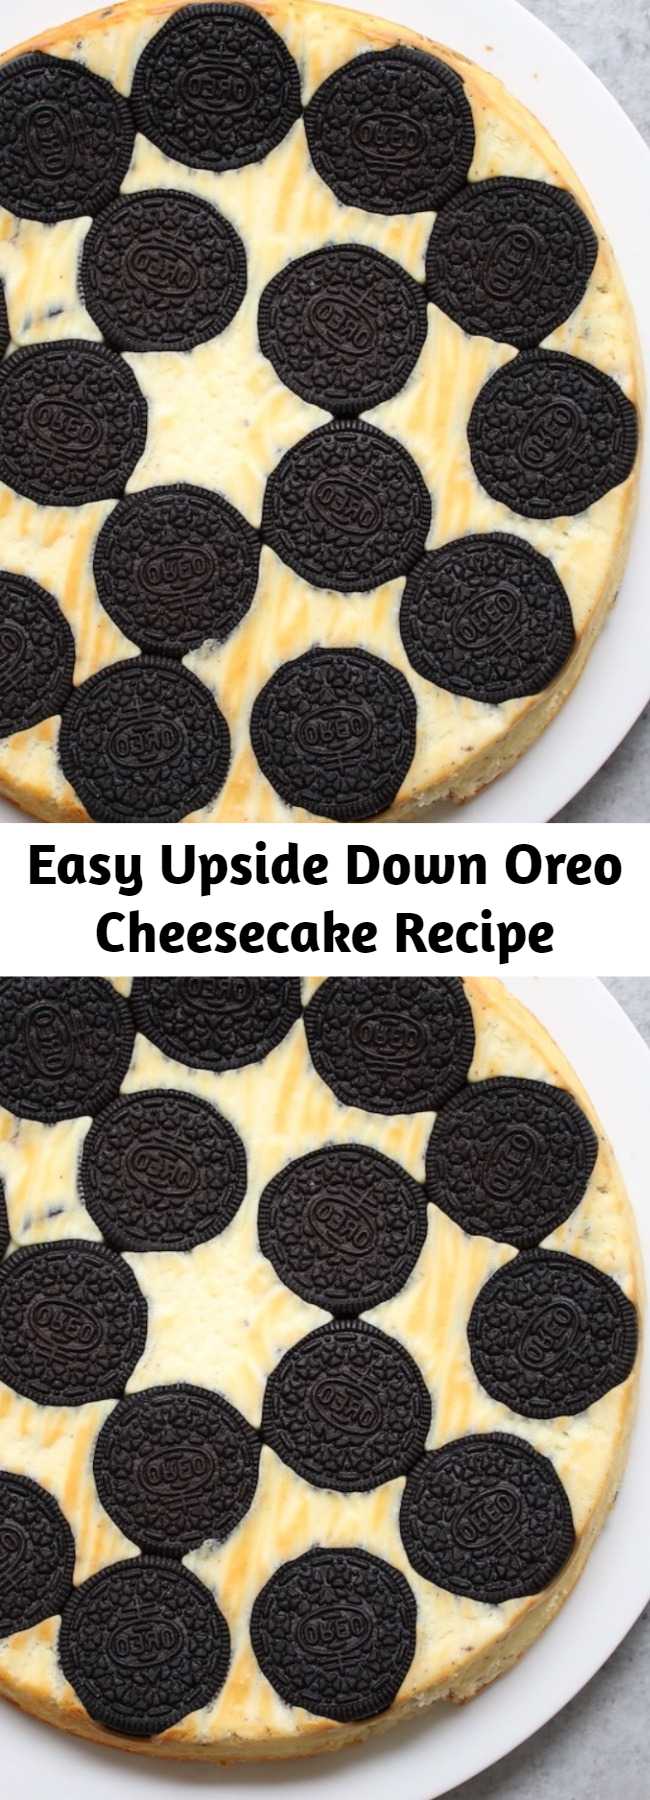 Easy Upside Down Oreo Cheesecake Recipe - Upside Down Oreo Cheesecake is a scrumptious dessert with an elegant presentation that never fails to impress! The cheesecake is easy to make with just 5 simple ingredients - cream cheese, eggs, sugar, yogurt and vanilla - and the bottom of the pan is lined with whole oreo cookies that moisten during baking for a melt-in-your-mouth sensation!